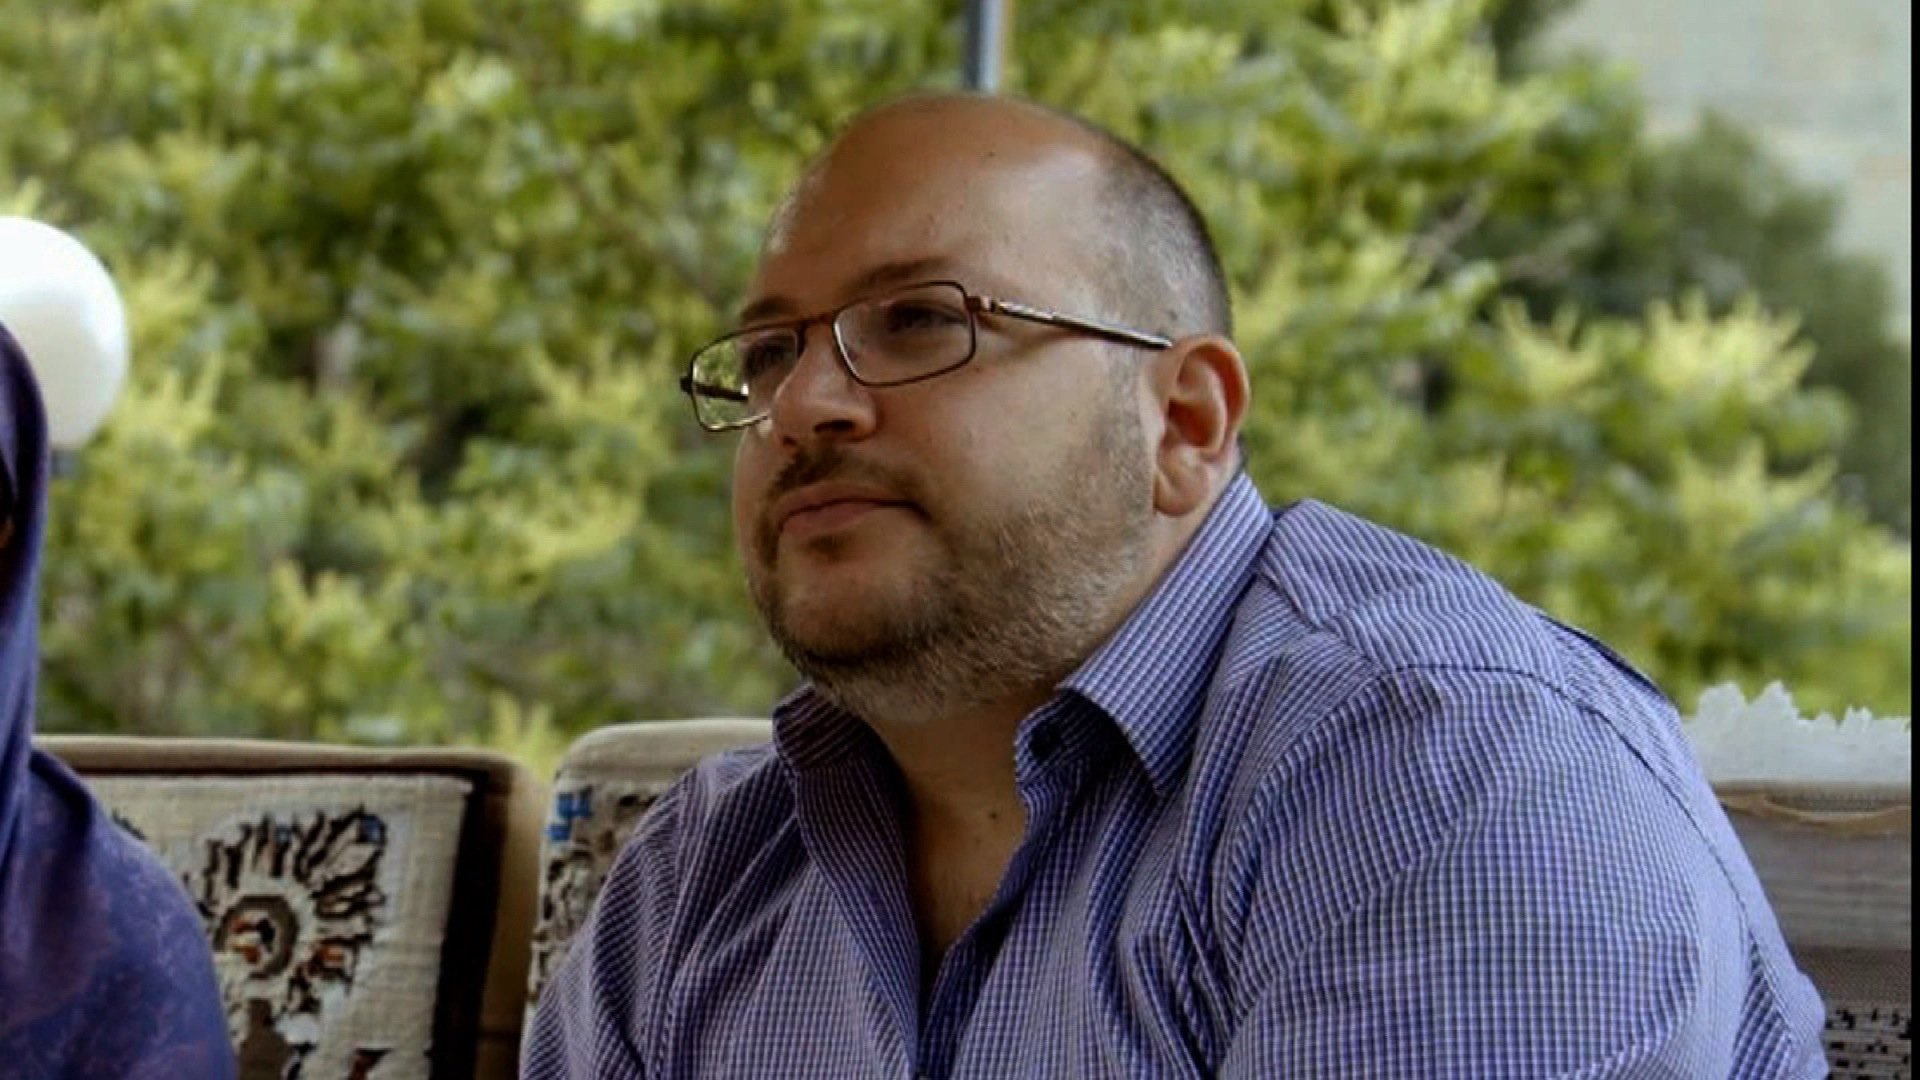 Iran's trial of Washington Post correspondent Jason Rezaian began in Tehran on Tuesday, May 26, 2015, under a cloak of secrecy and international condemnation. Rezaian's mother Mary and wife Yeganeh were not allowed to observe the proceedings, which ended after a couple of hours, according to Iranian state news agencies.